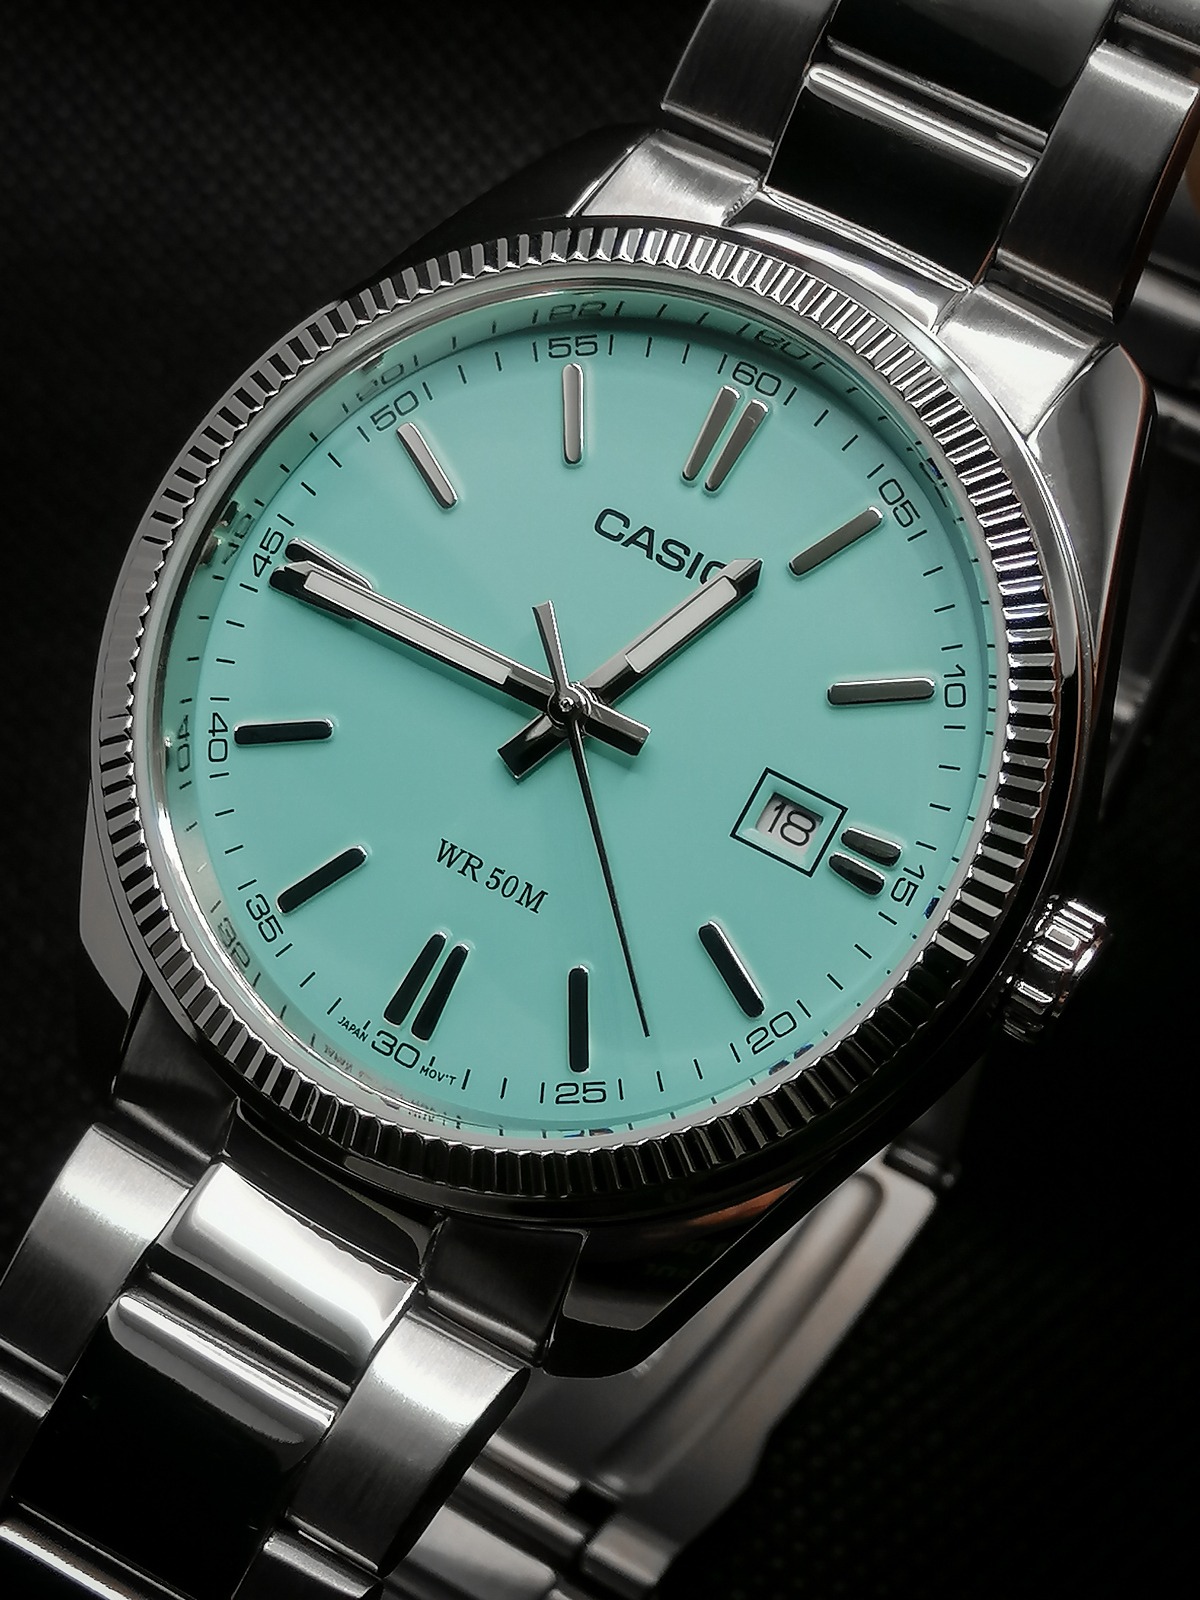 [CASIO Review] MTP-1302PD-2A2V “Tiffany Blue” — old shapes in a popular color